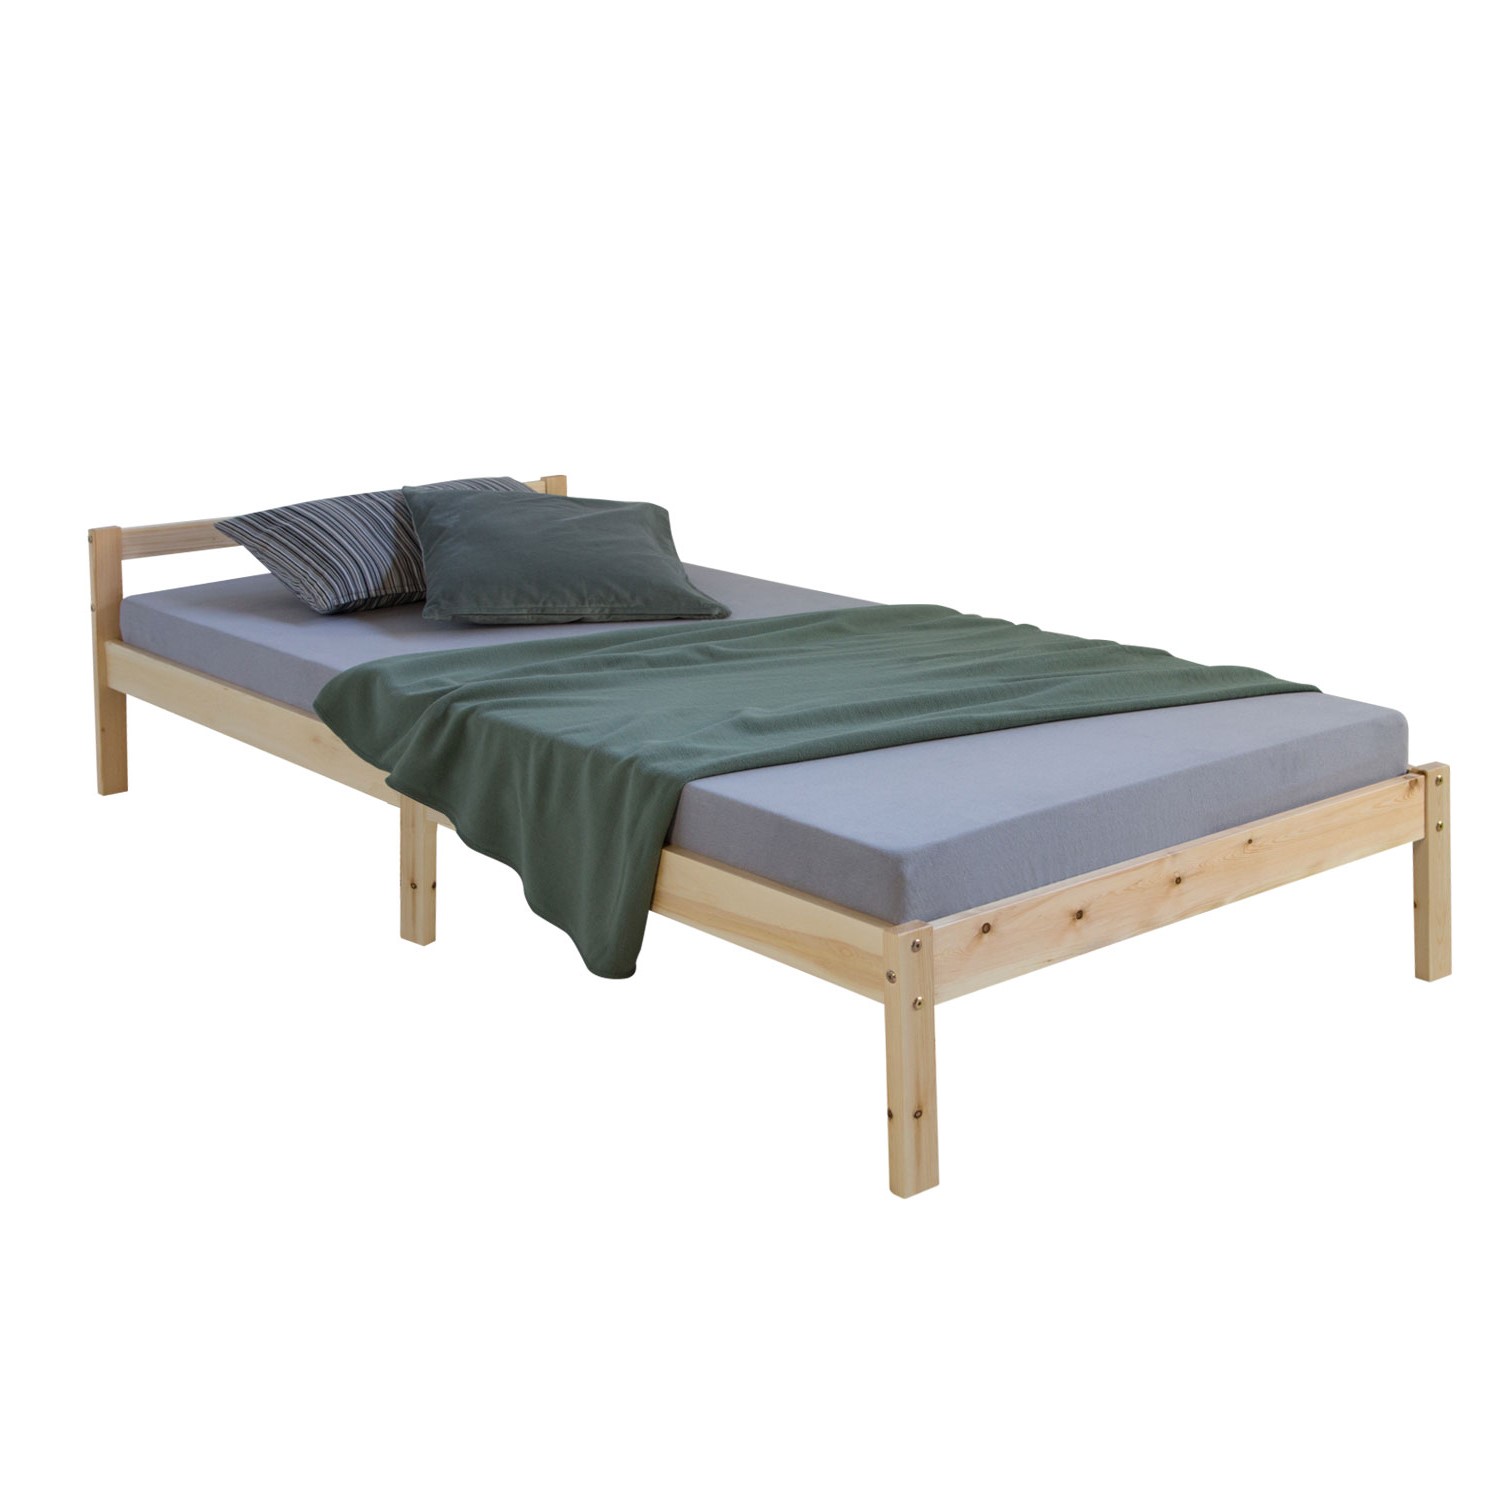 Solid wood single bed youth bed 200 x 90 nature slatted futon bed bed